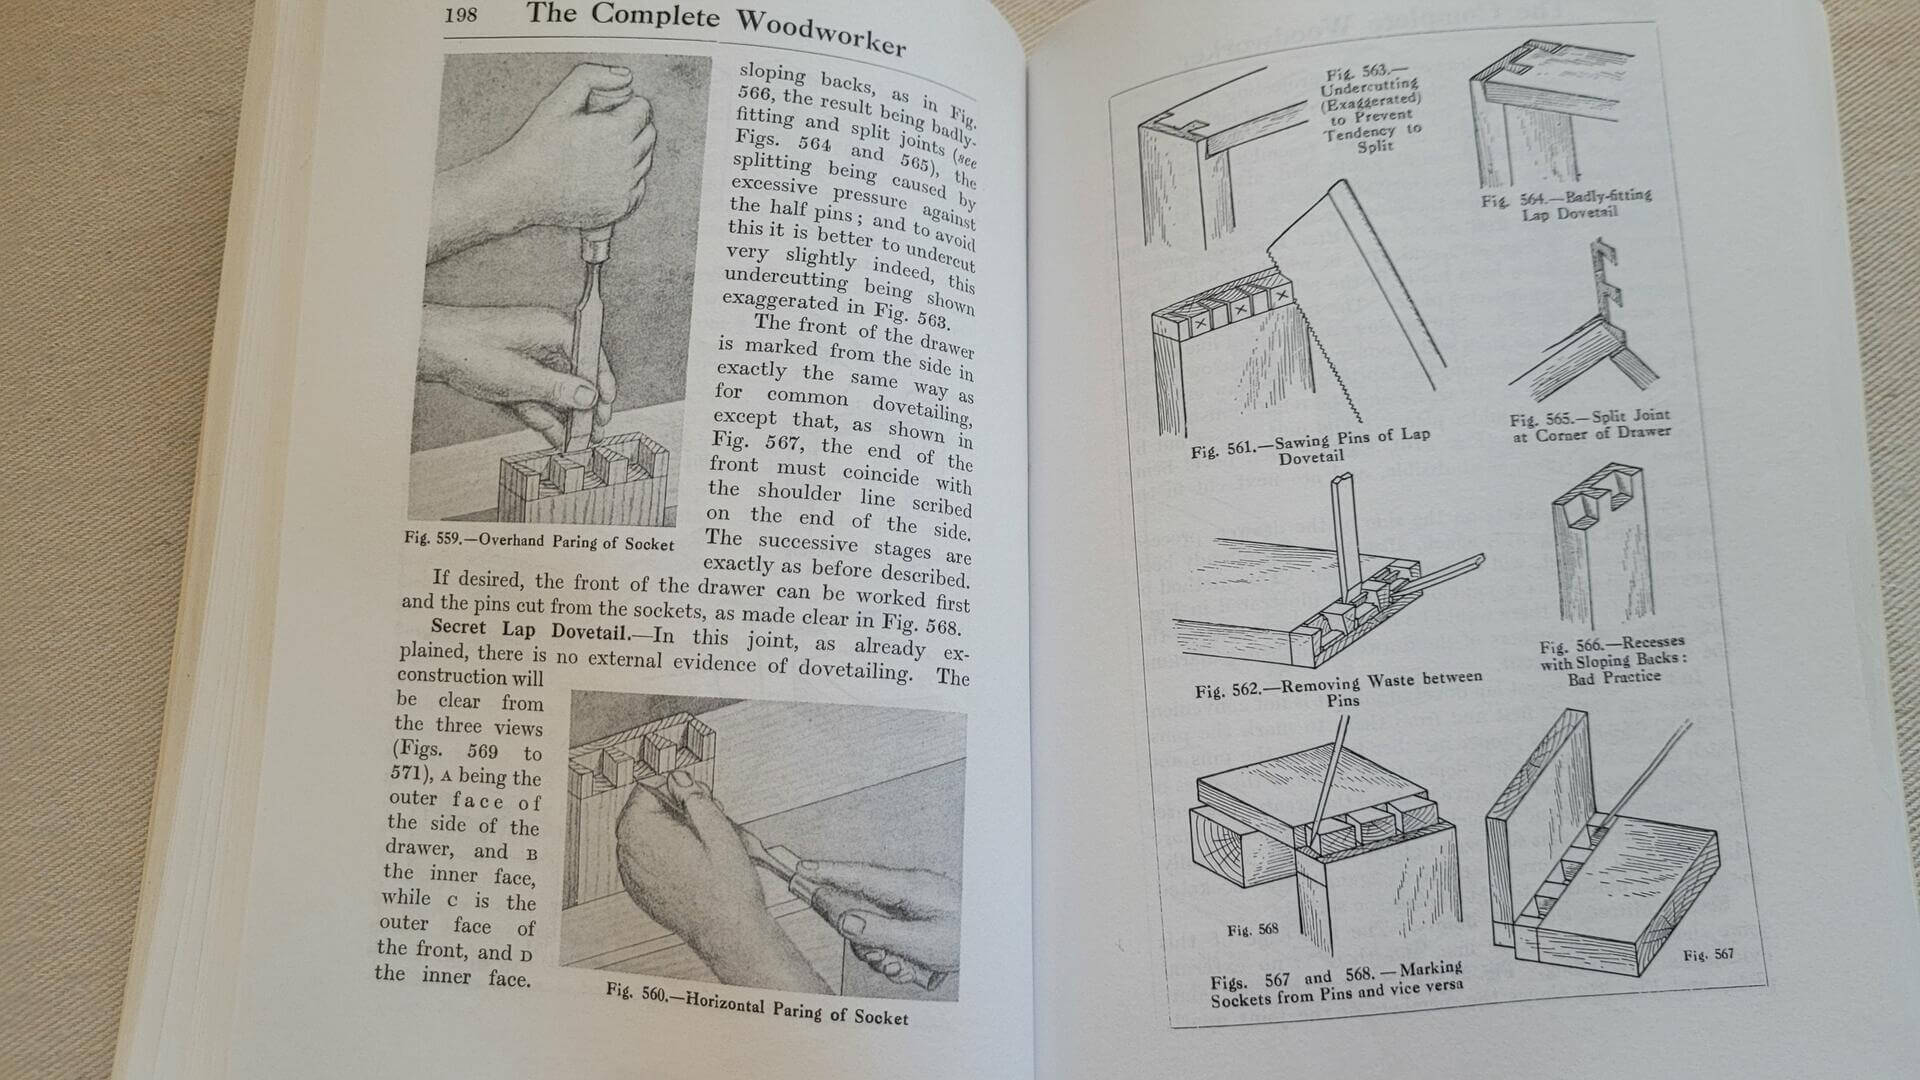 The Complete Woodworker - For the Craftsman or the Begginer book edited by Jones, Bernard E. and published reprint edition by Ten Speed Press in 1998